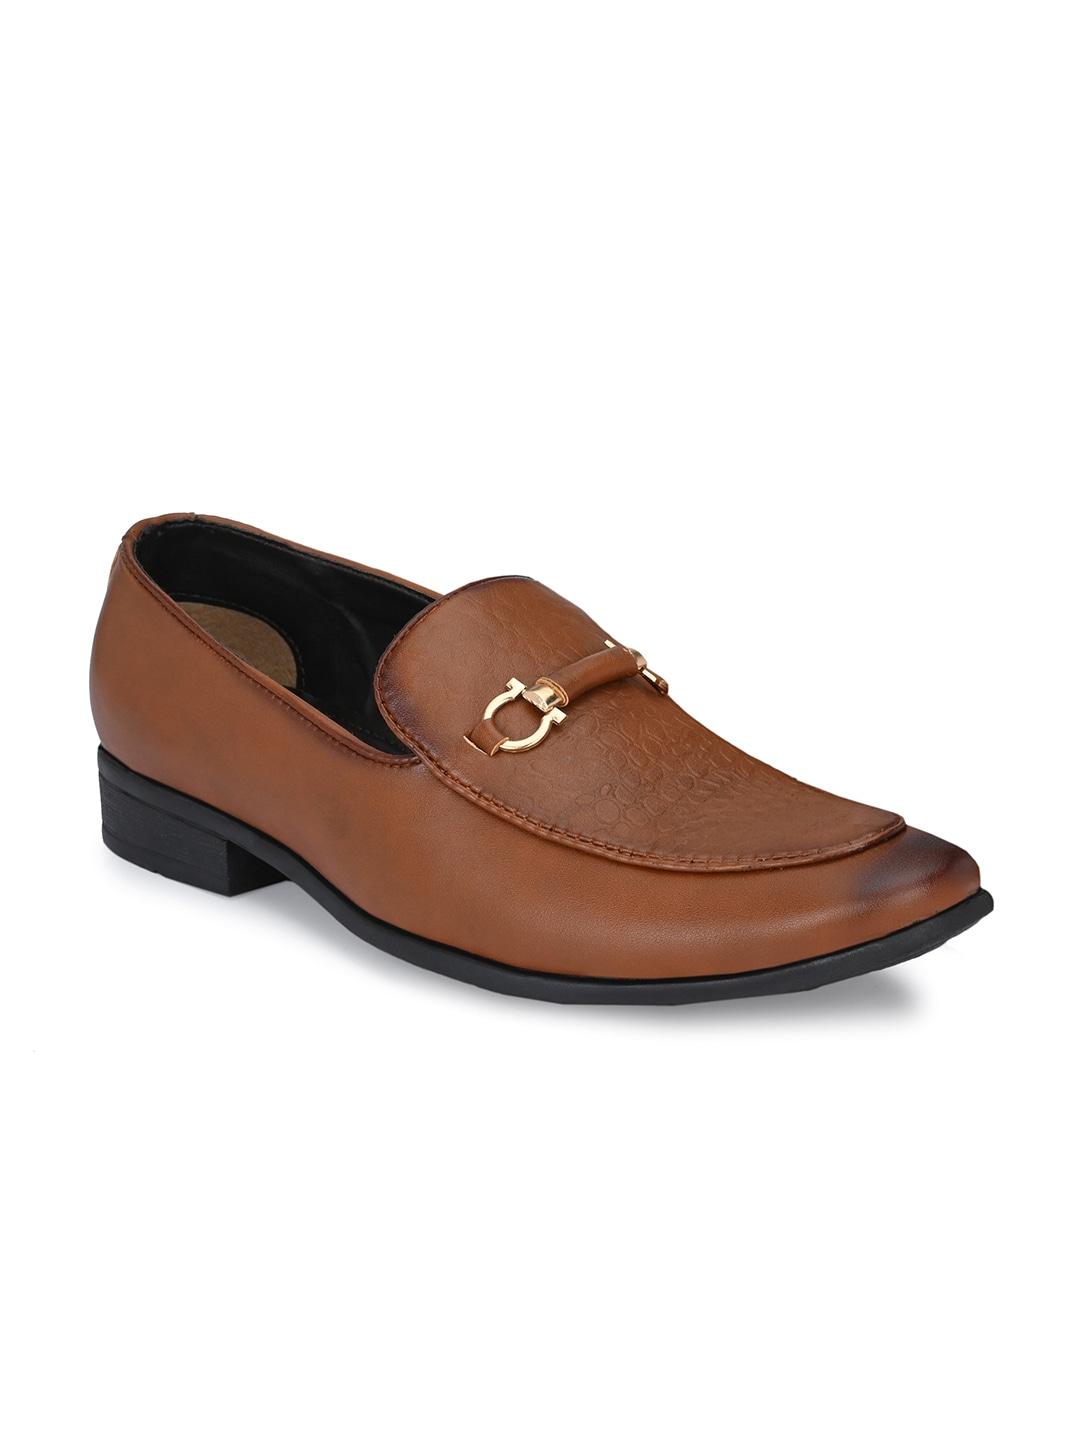 provogue-men-tan-brown-solid-formal-loafers-shoes